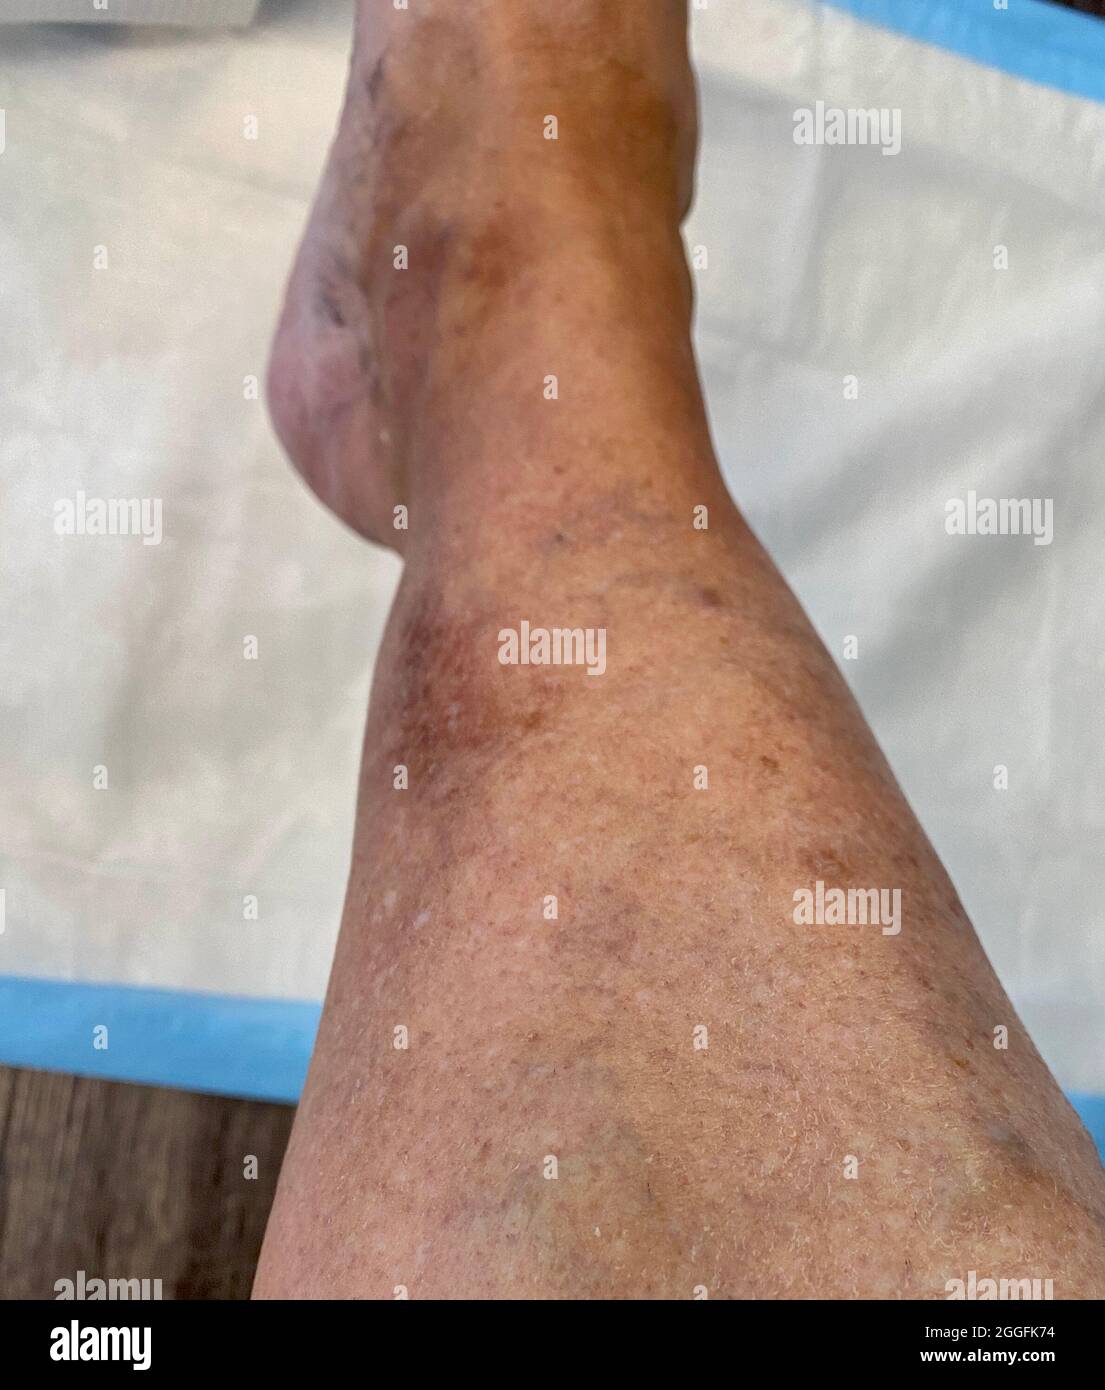 Varicose veins on the lower leg of a female in her late 40's. Stock Photo